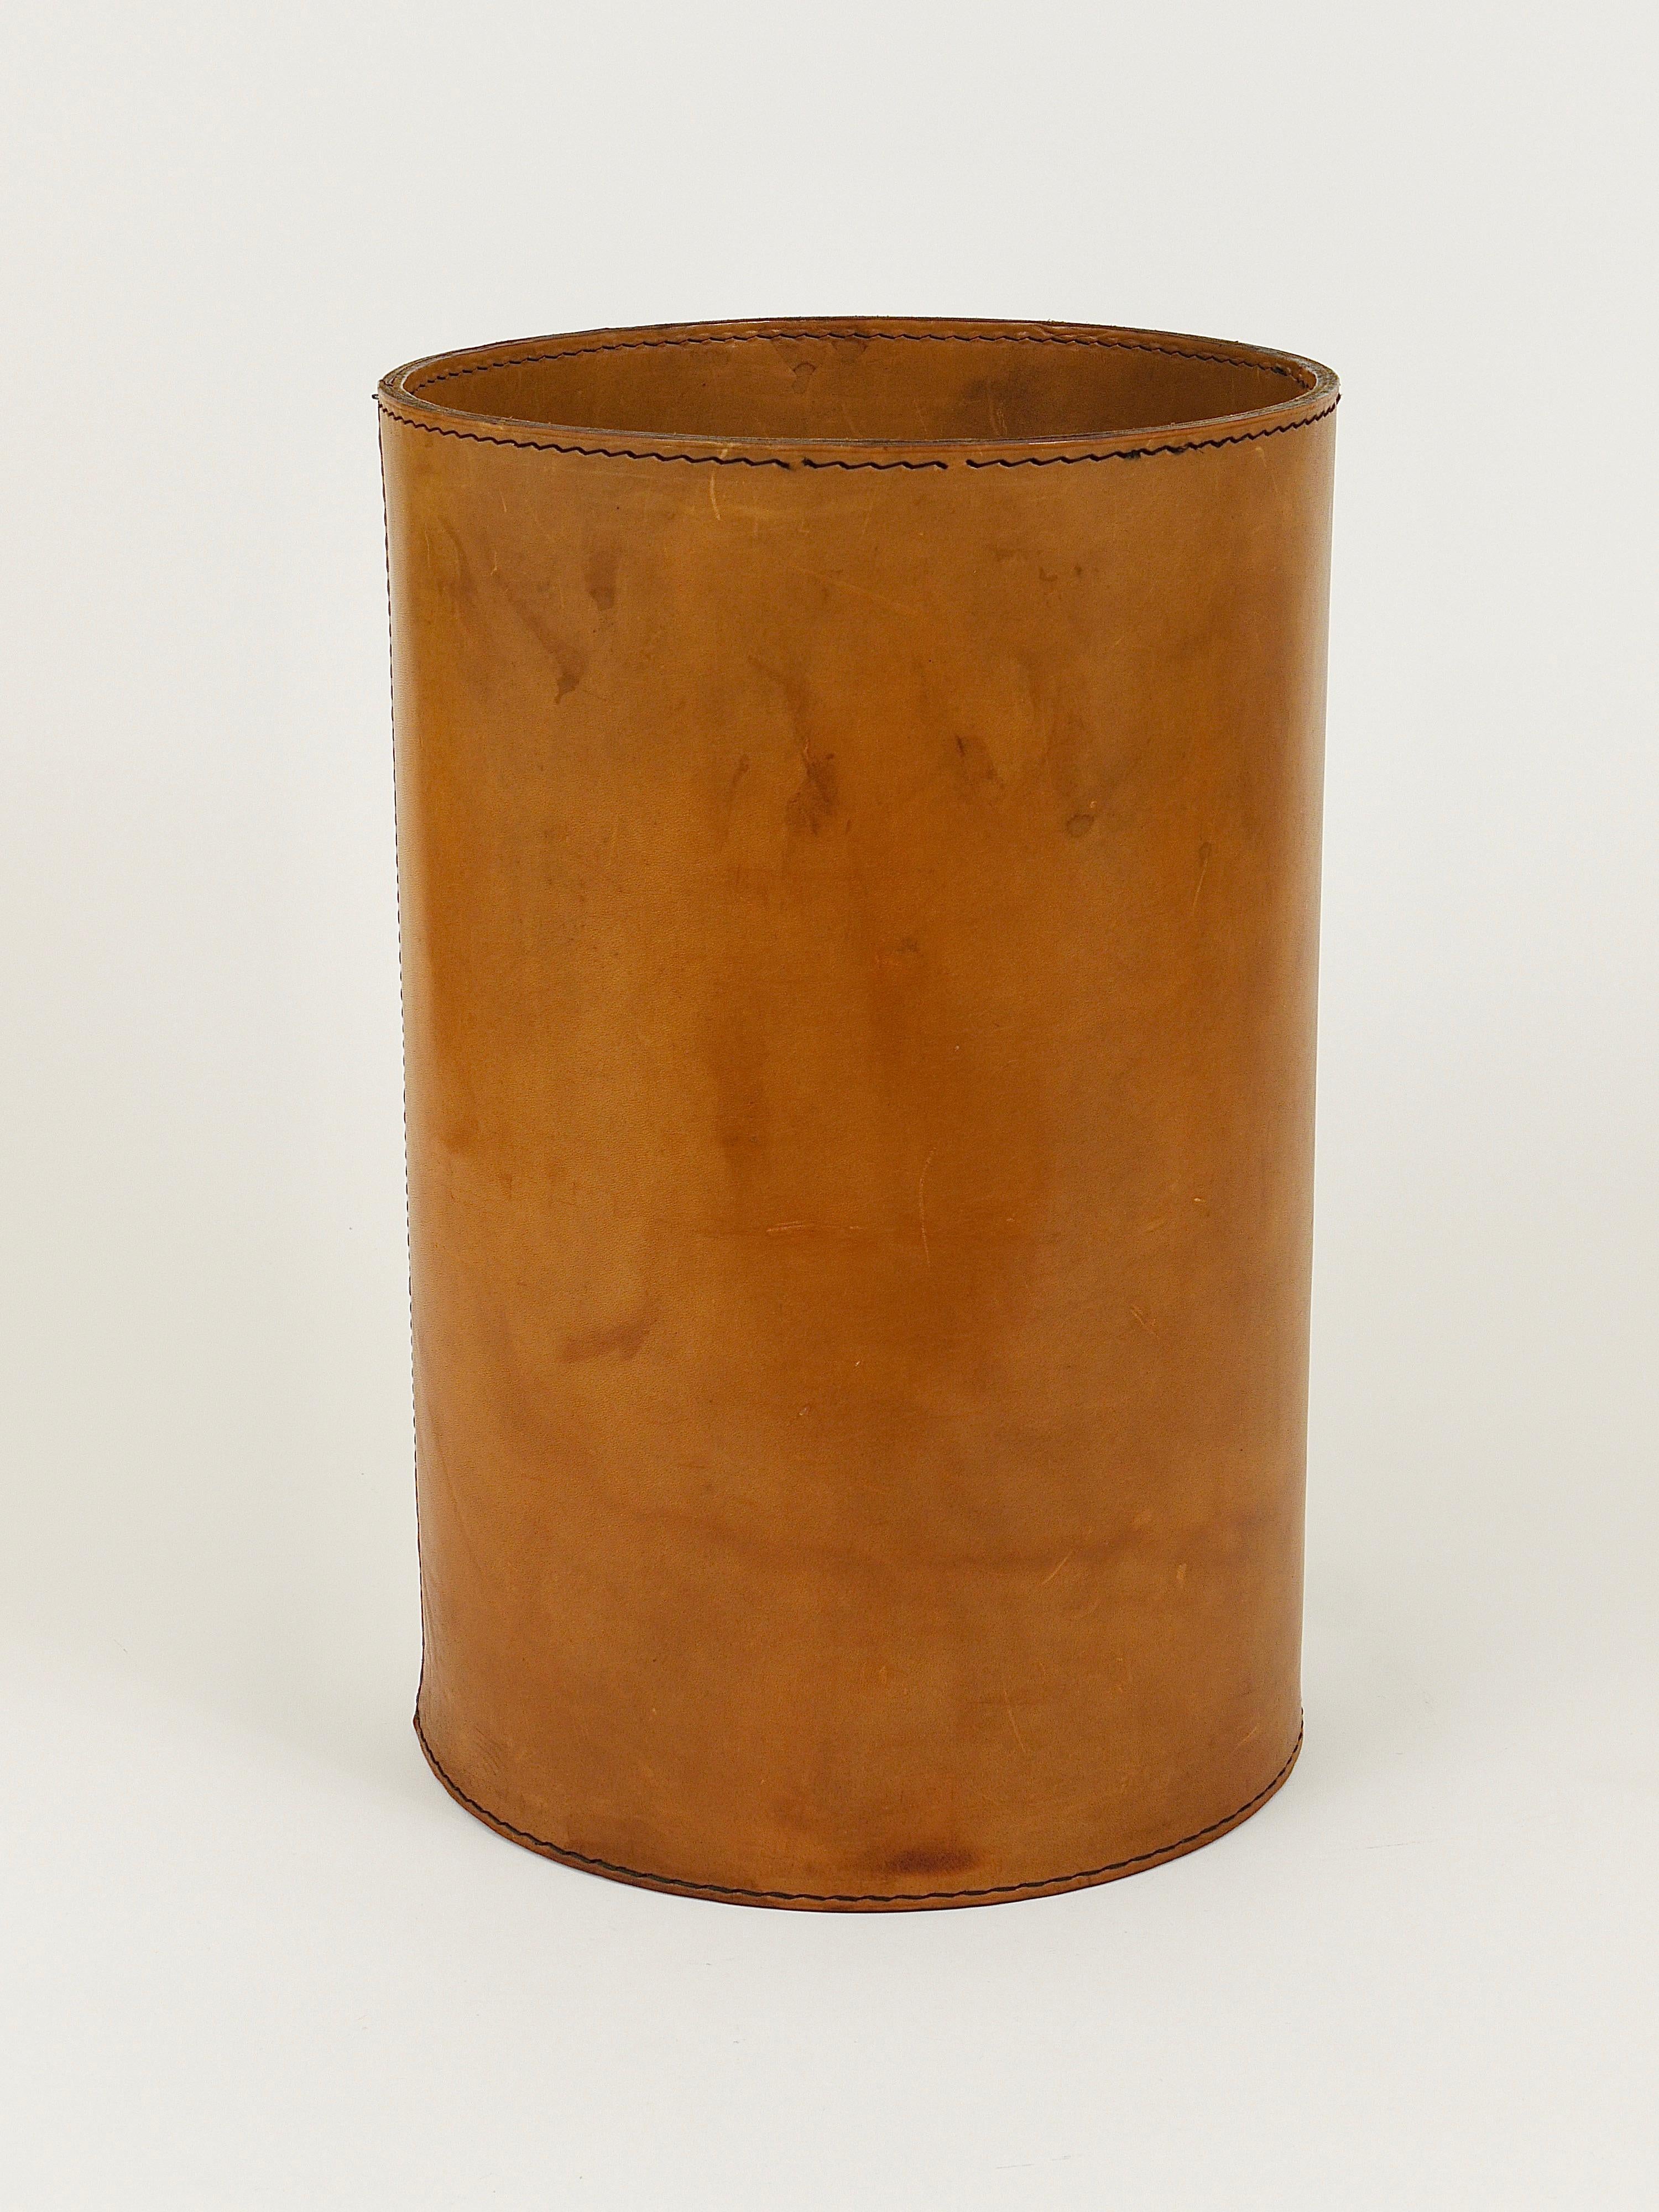 Hand-Crafted Mid-Century Carl Auböck Brown Leather Wastepaper Basket, Austria, 1950s